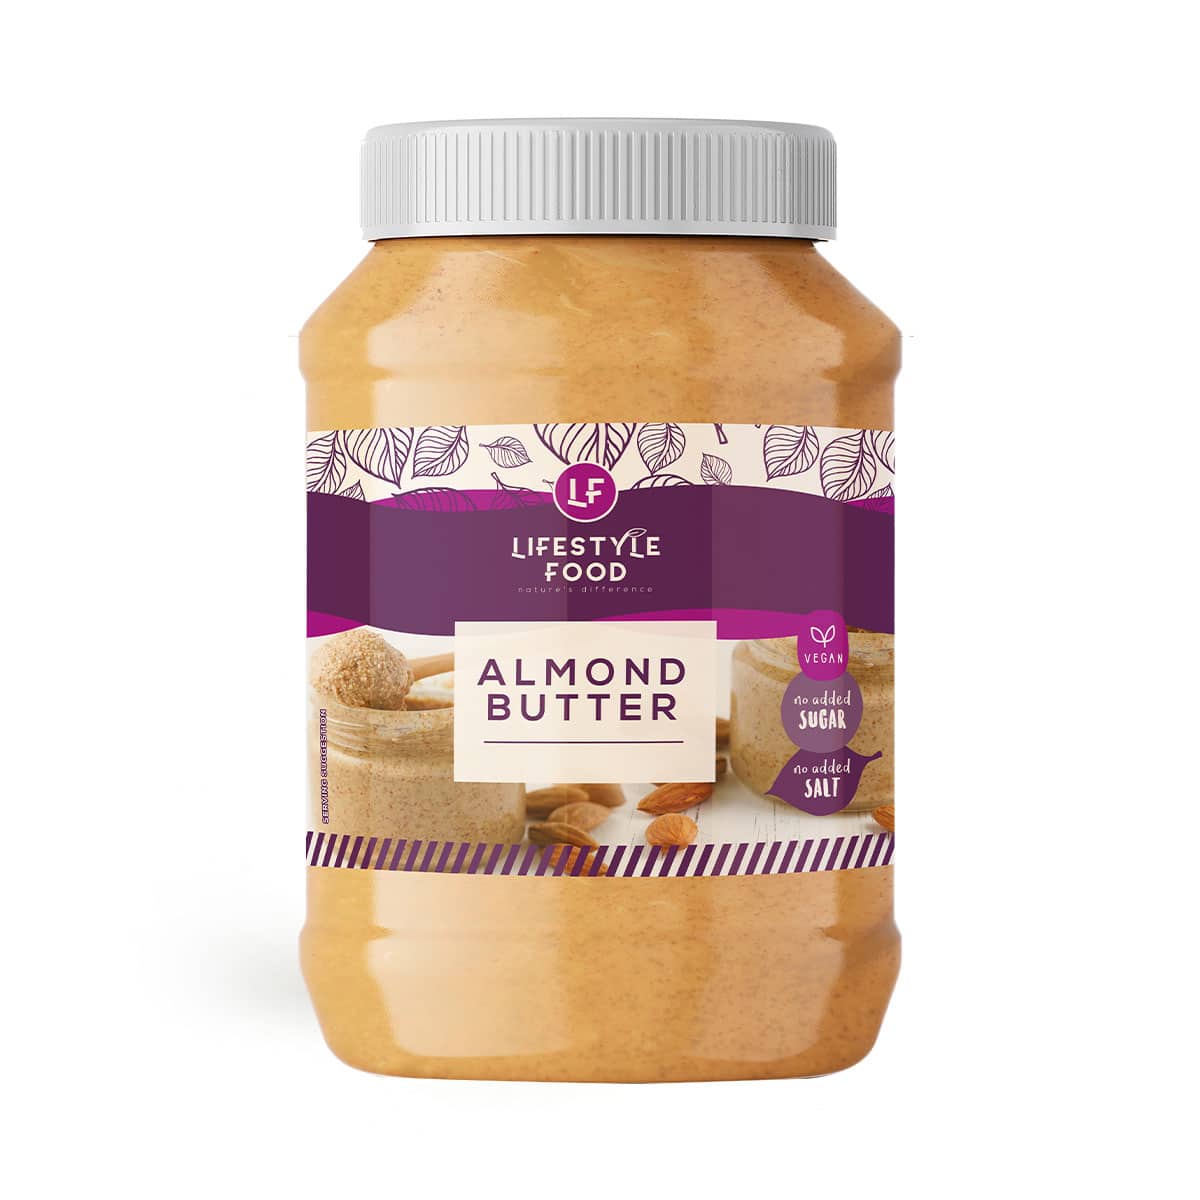 Lifestyle Food Almond Butter - 750g